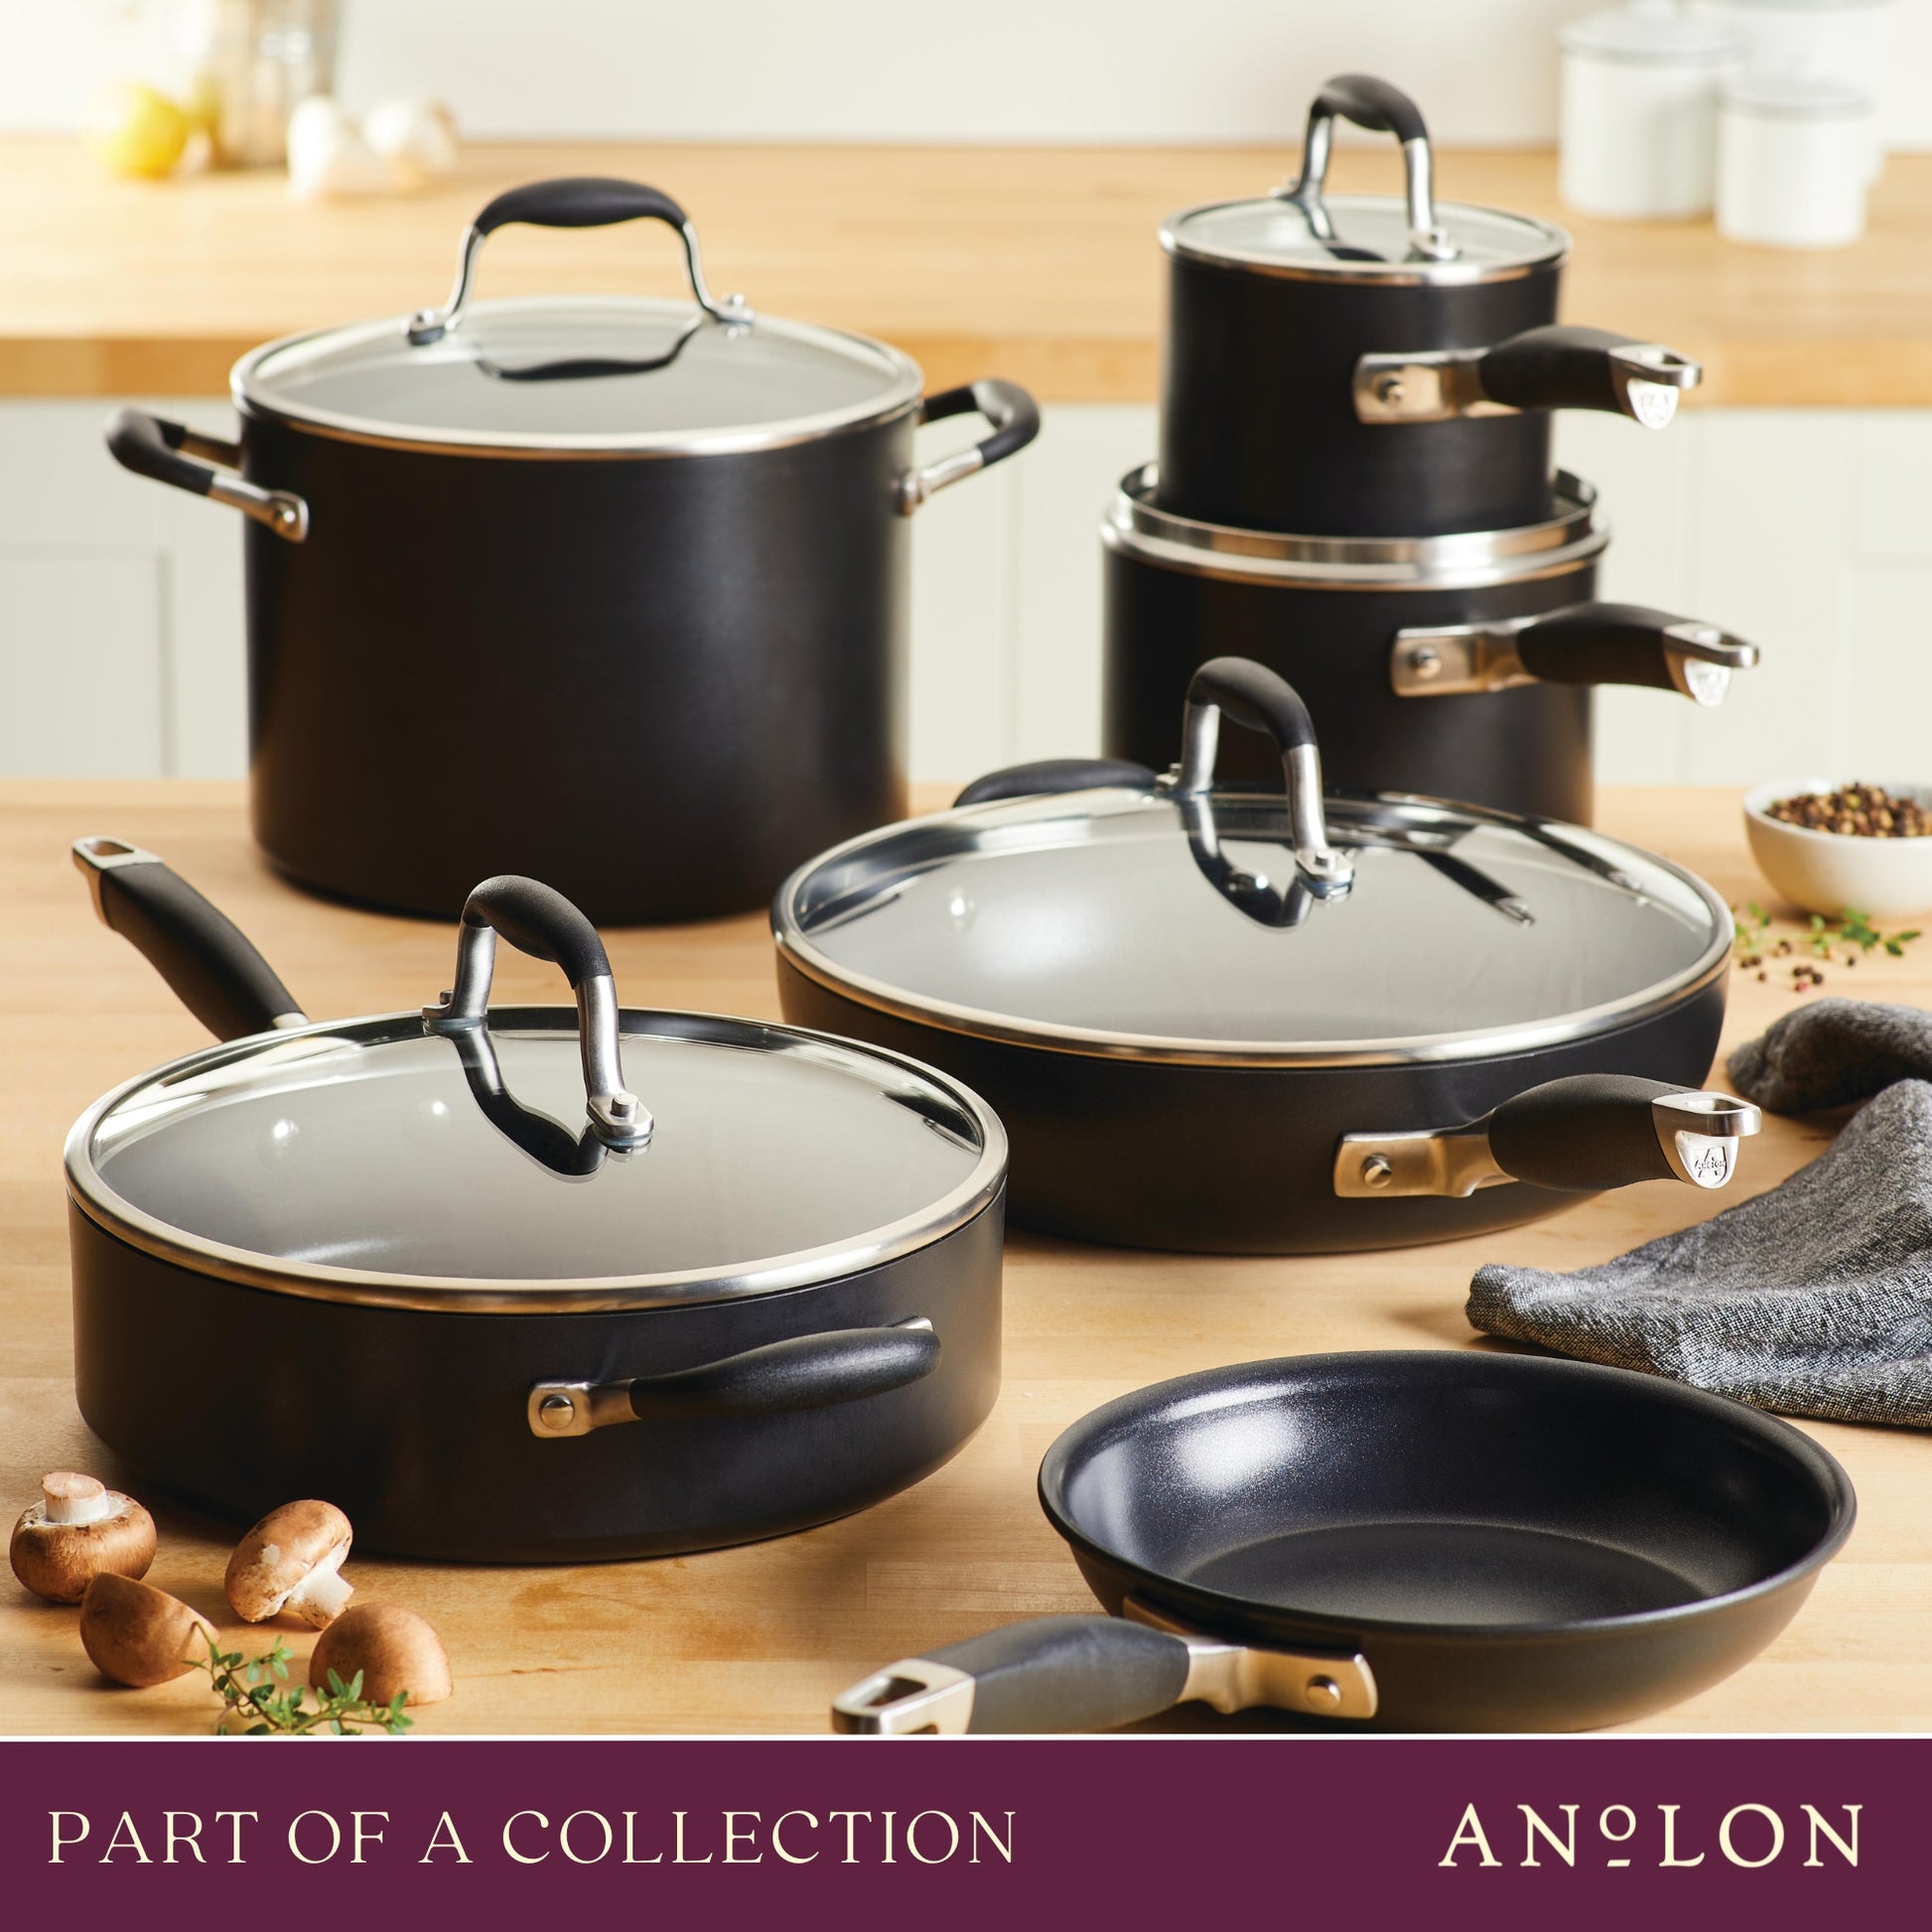 Anolon Advanced Home Hard-Anodized Nonstick Ultimate Pan, 12